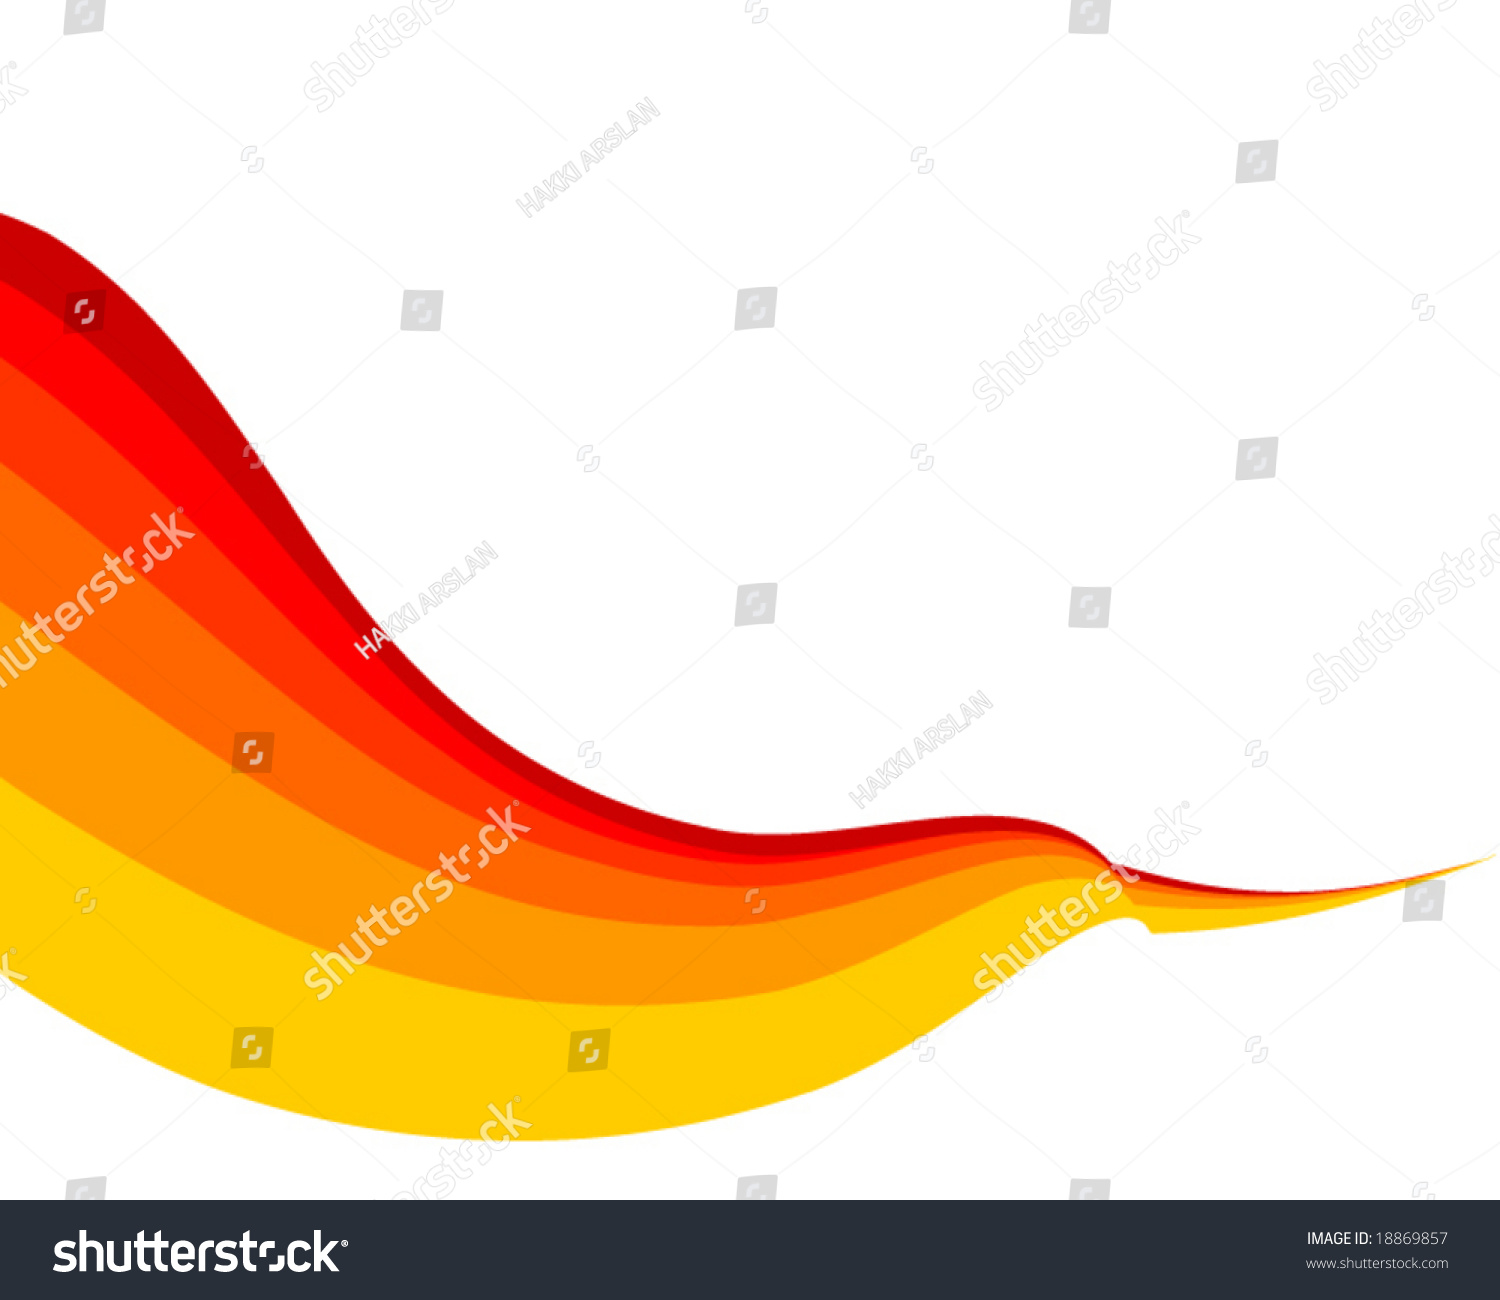 Red Yellow Orange Objects Stock Vector 18869857 - Shutterstock